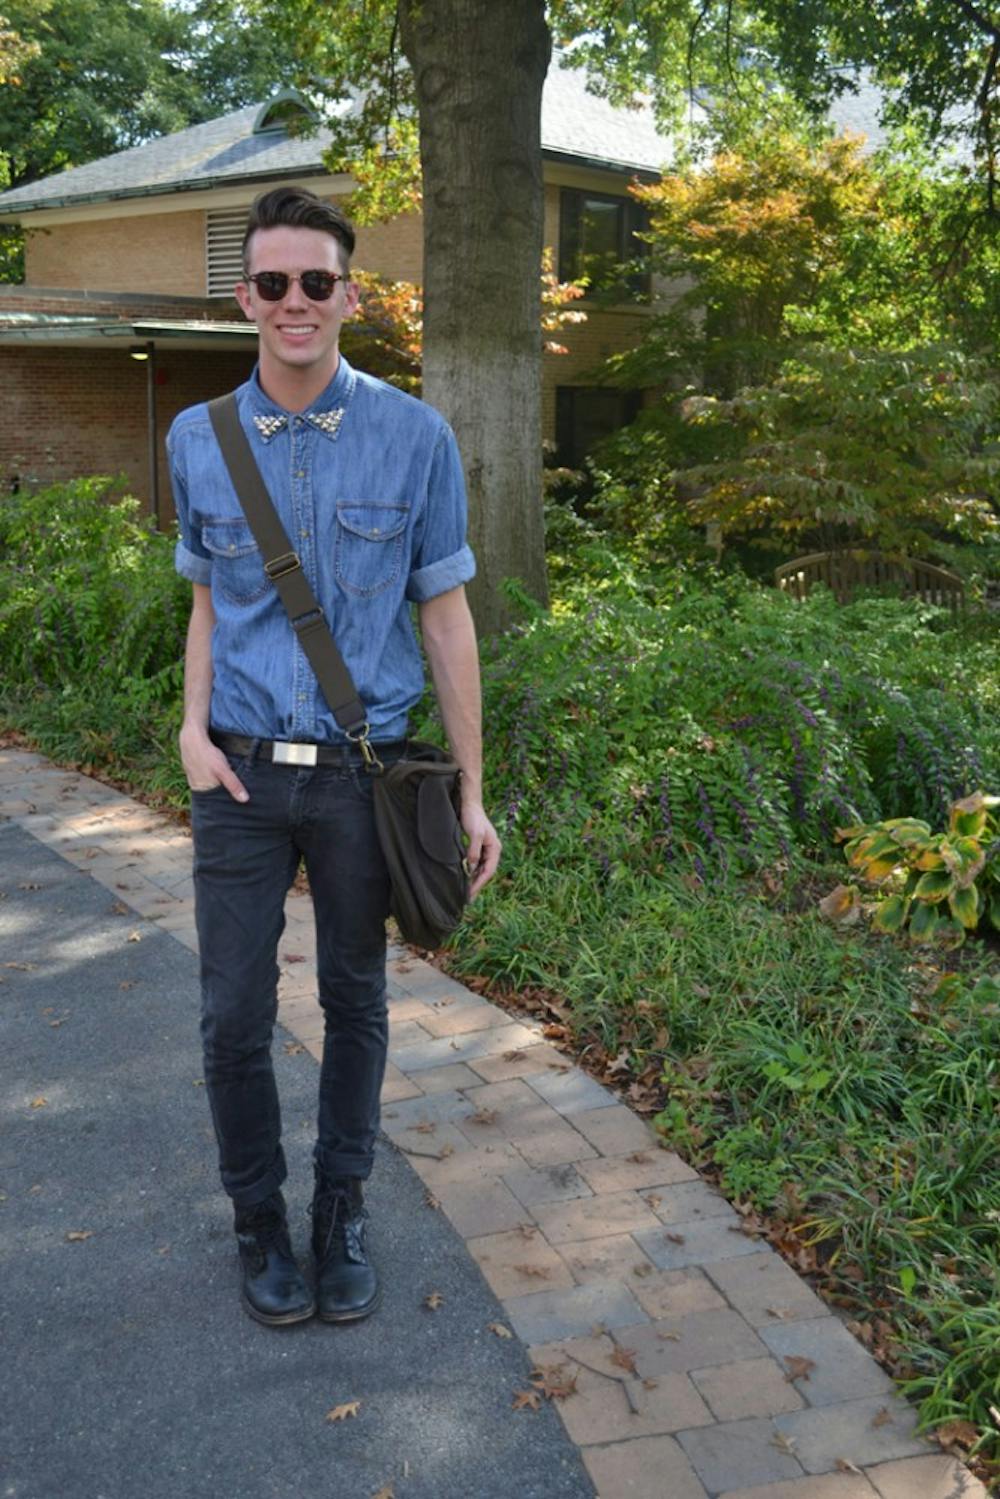 DIY studded shirt -Goodwill // jeans - Levis // belt - Express // boots and sunglasses - Urban Outfitters // briefcase  - Barbour